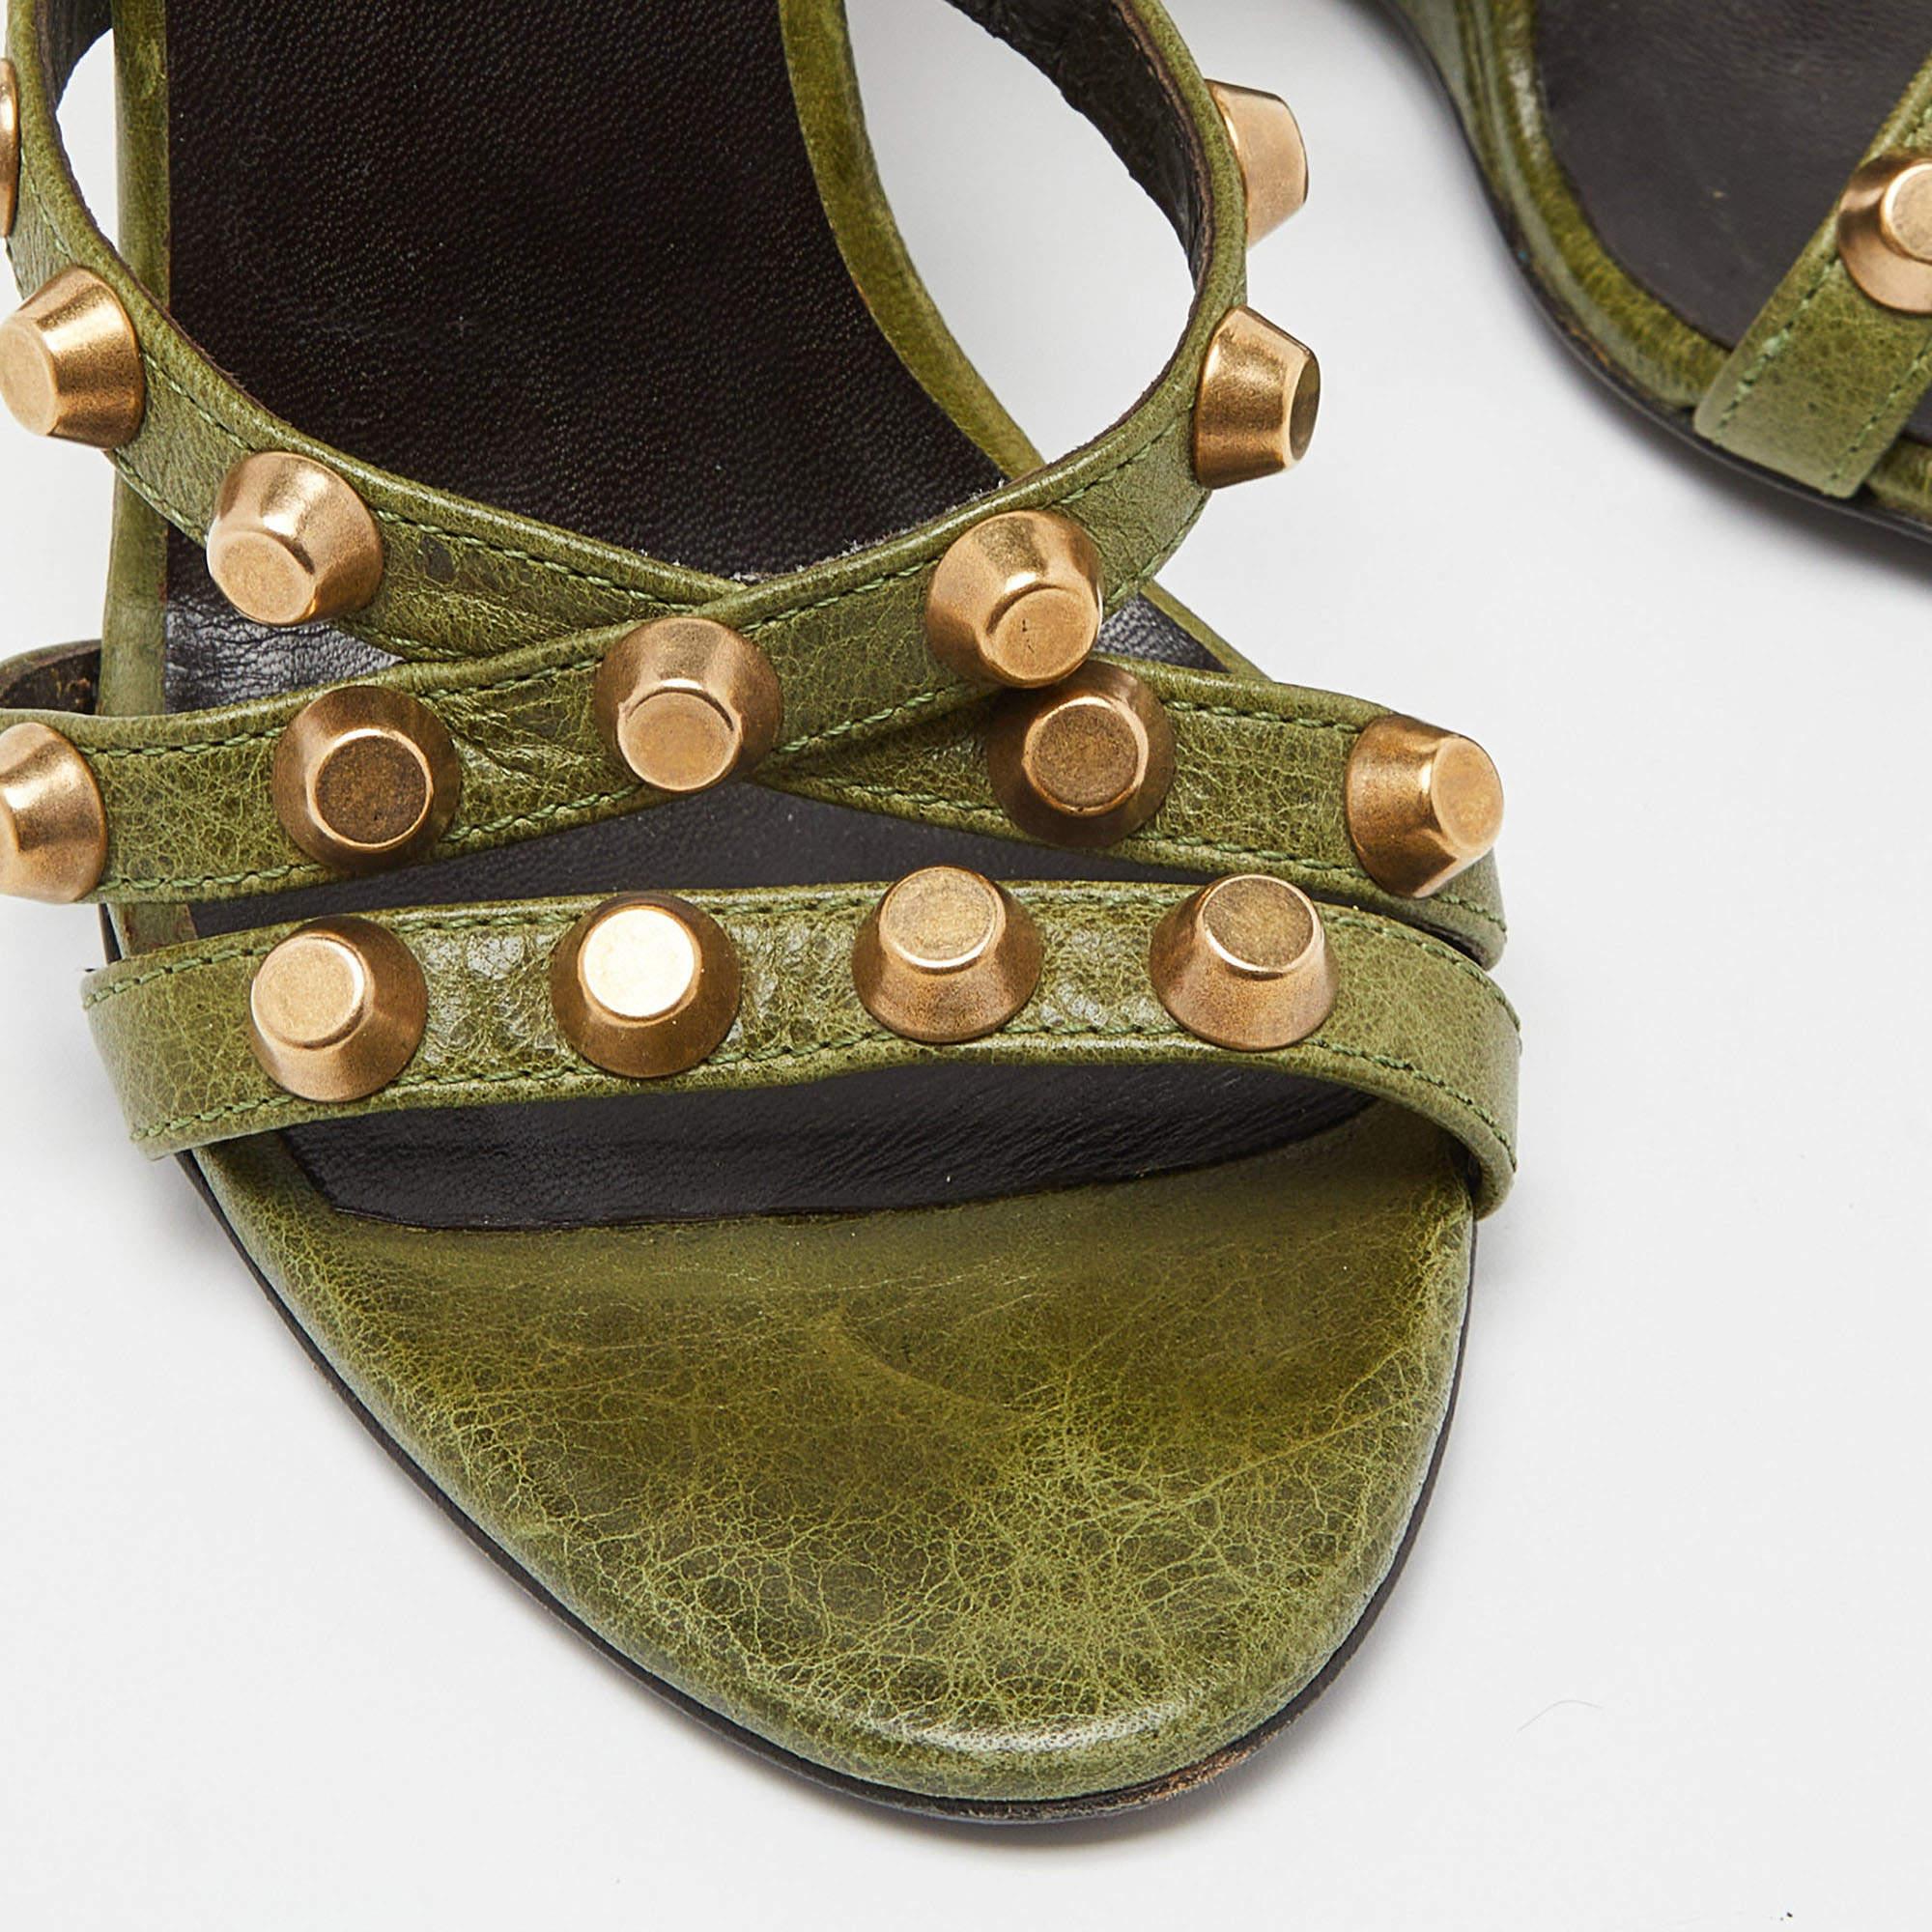 Balenciaga Green Leather Arena Studded Wedge Sandals Size 36.5 In Good Condition For Sale In Dubai, Al Qouz 2